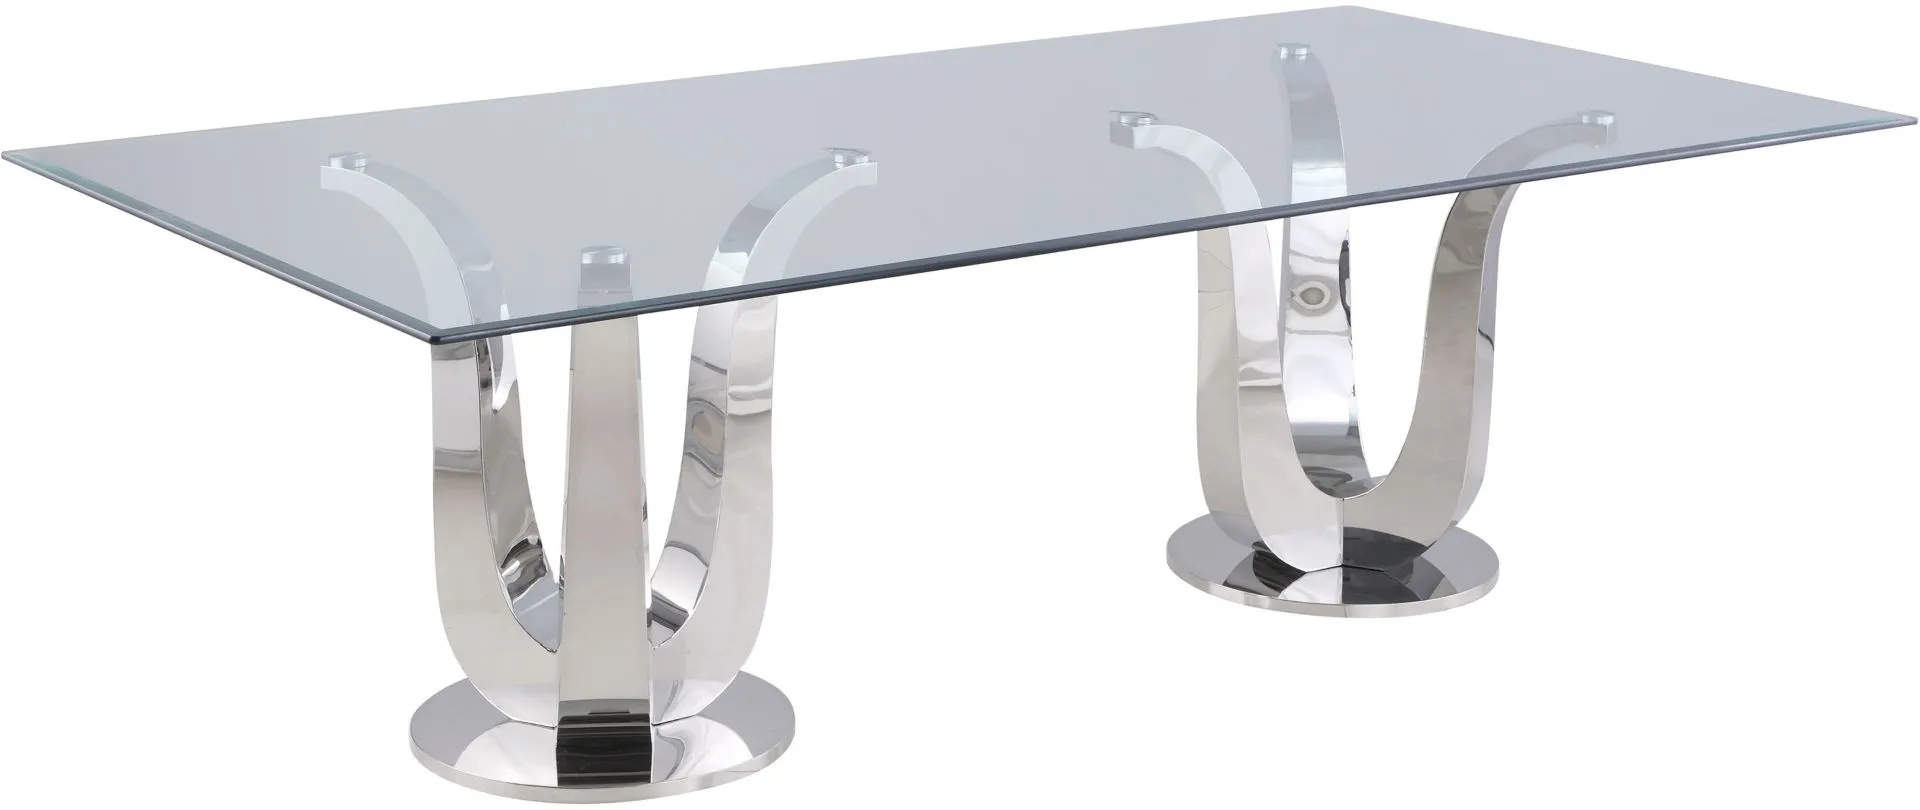 Chintaly Imports Adelle Dining Table in Silver by Chintaly Imports